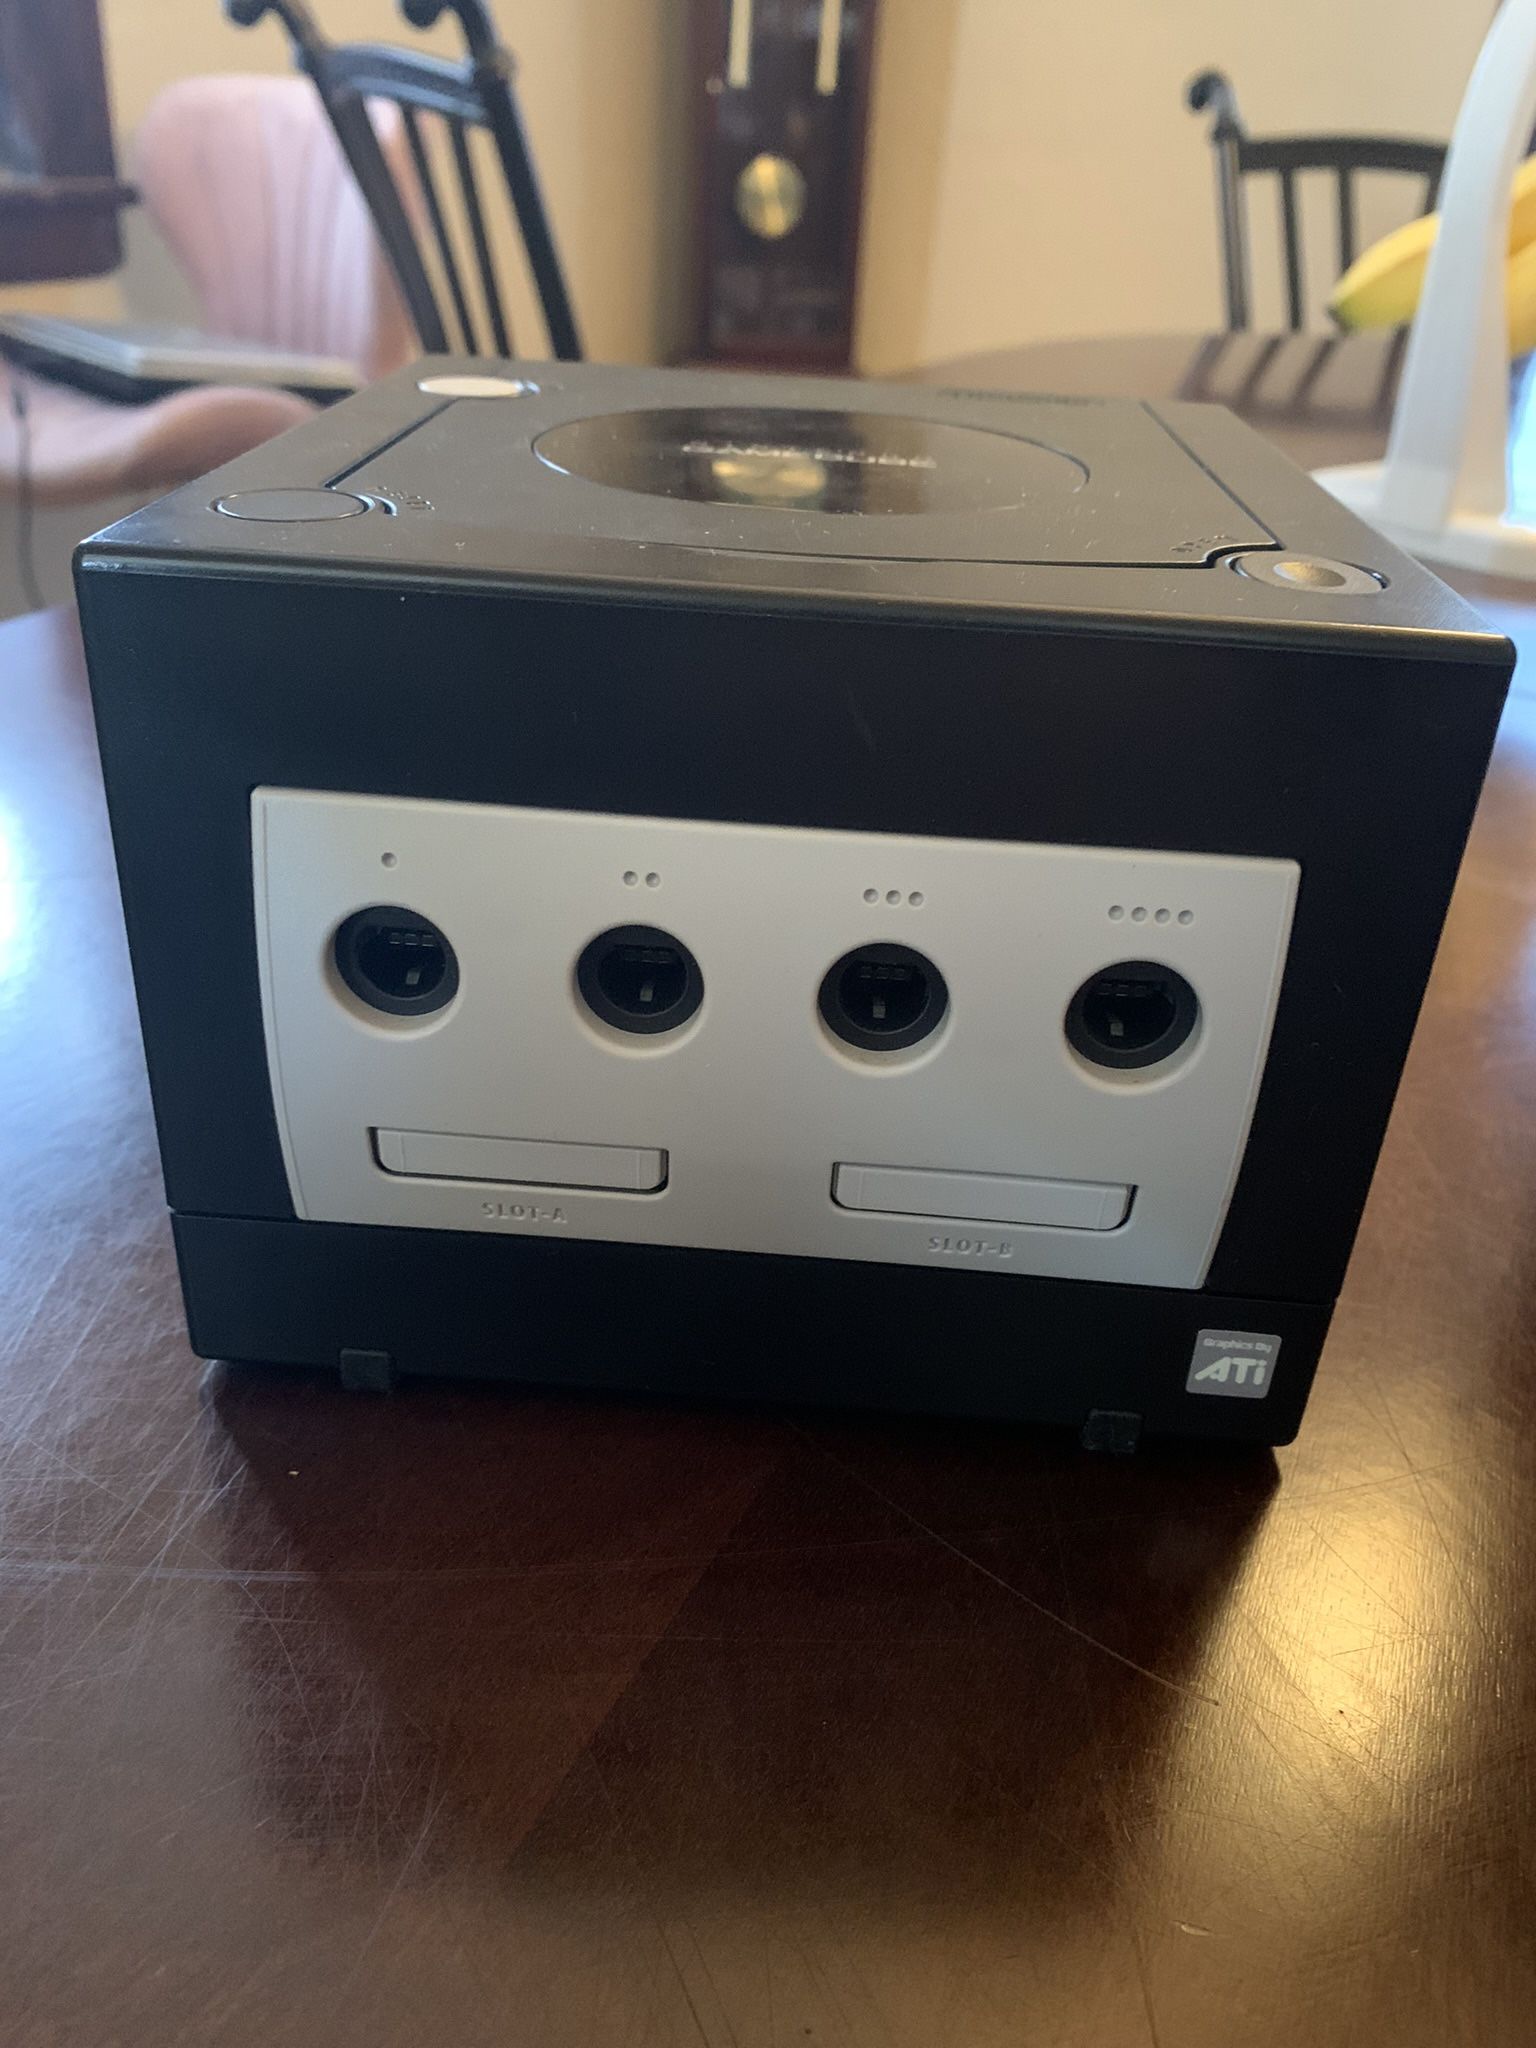 Great Condition GameCube with Luigi’s Mansion Game